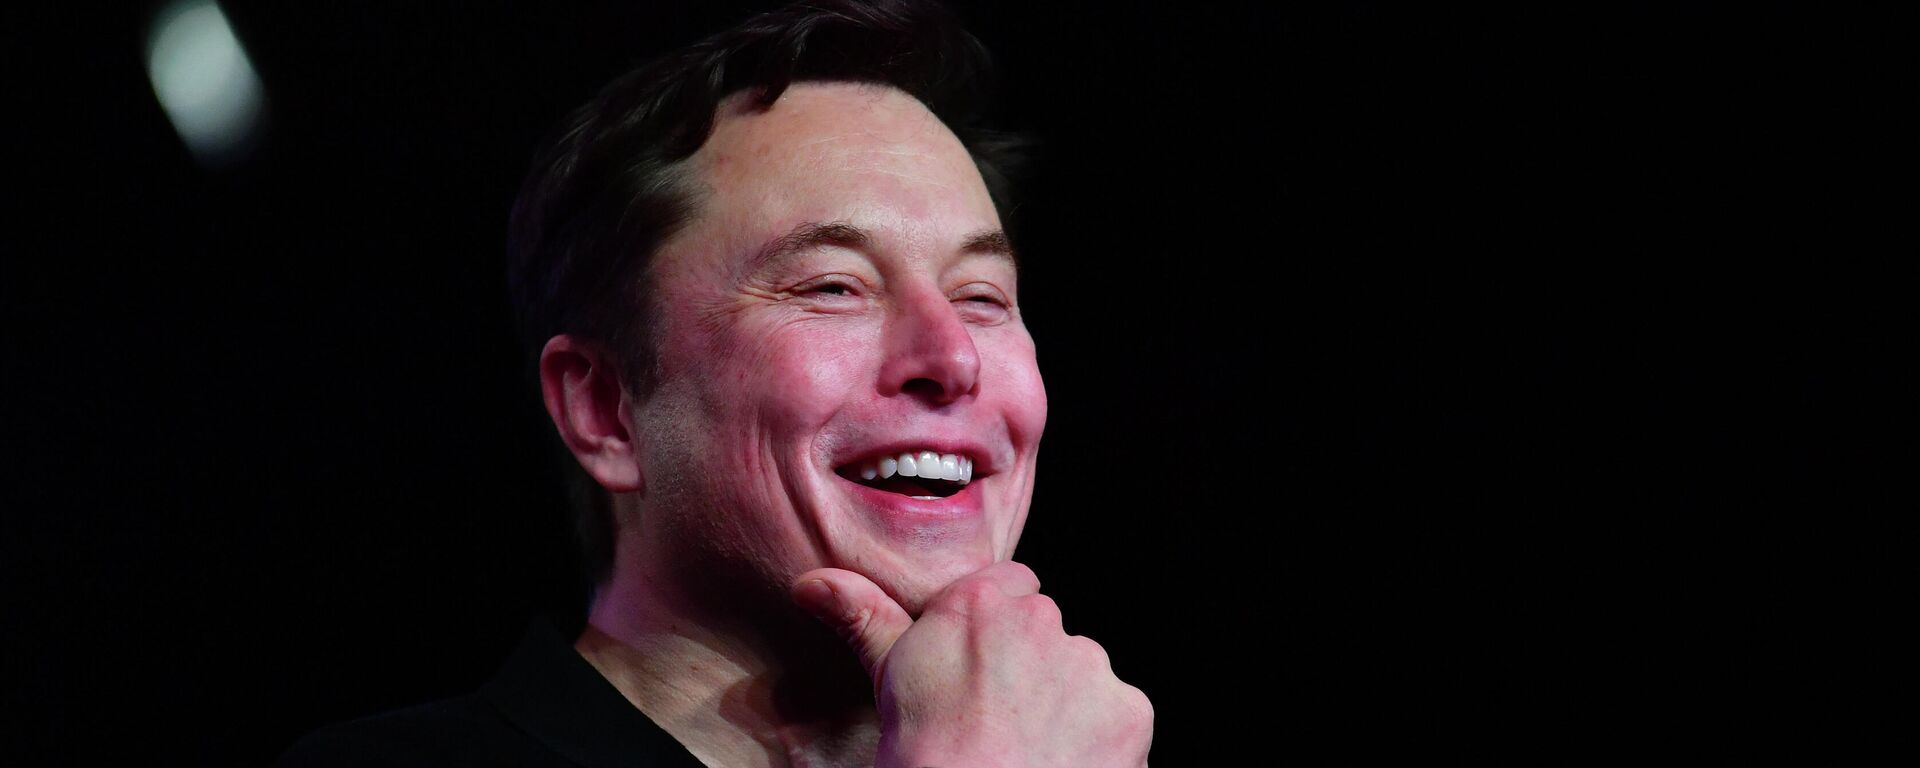  In this file photo taken on March 14, 2019 Tesla CEO Elon Musk reacts during the unveiling of the new Tesla Model Y in Hawthorne, California. - Sputnik International, 1920, 06.12.2021